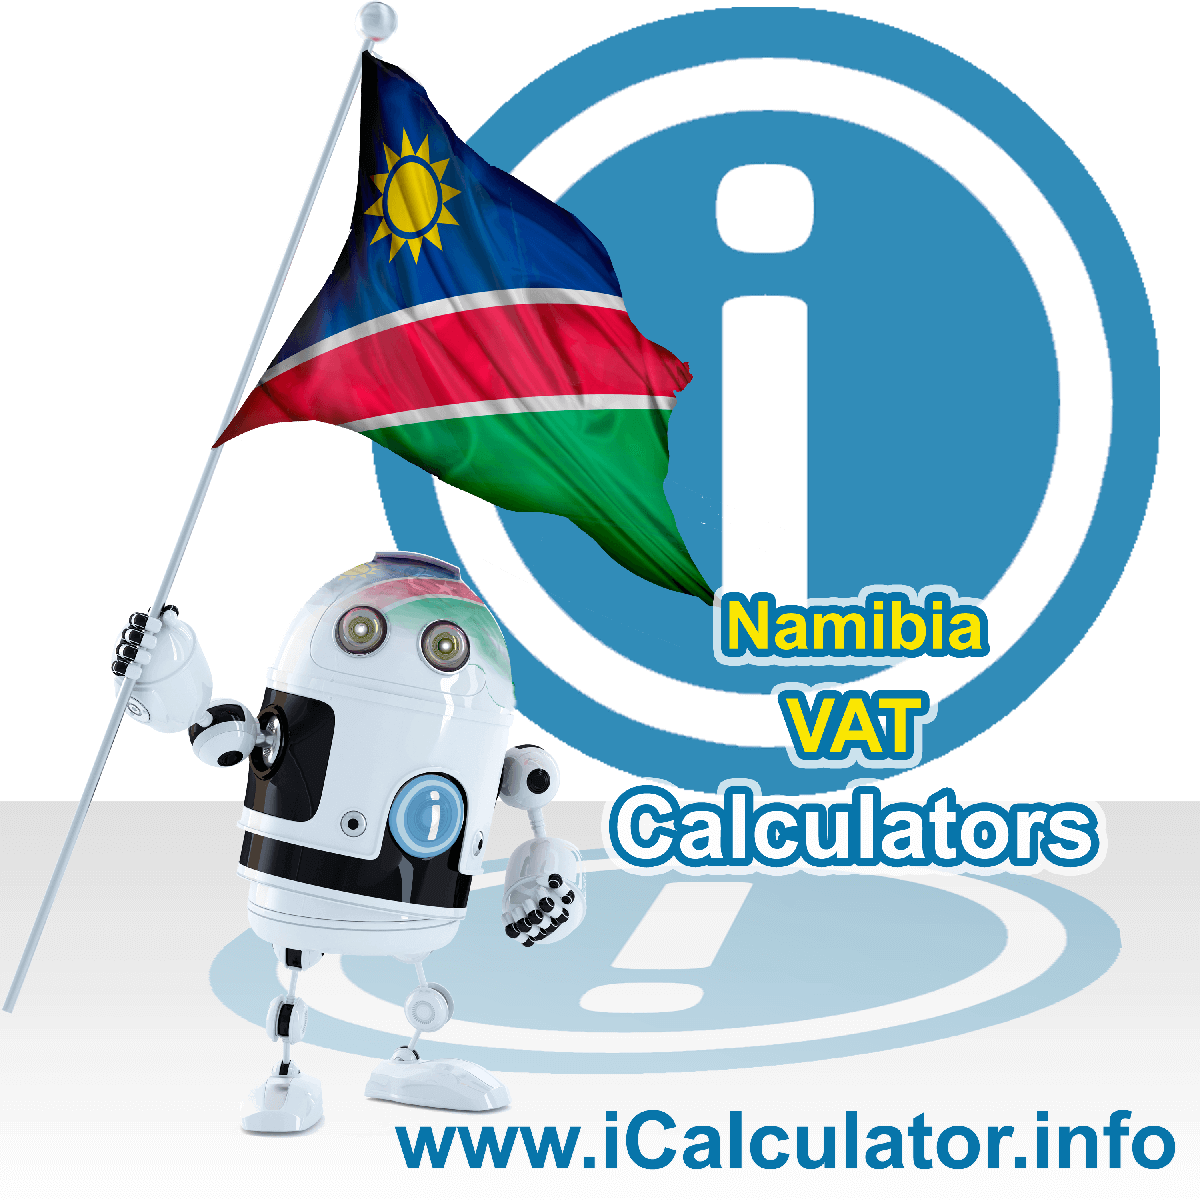 Namibia VAT Calculator. This image shows the Namibia flag and information relating to the VAT formula used for calculating Value Added Tax in Namibia using the Namibia VAT Calculator in 2024